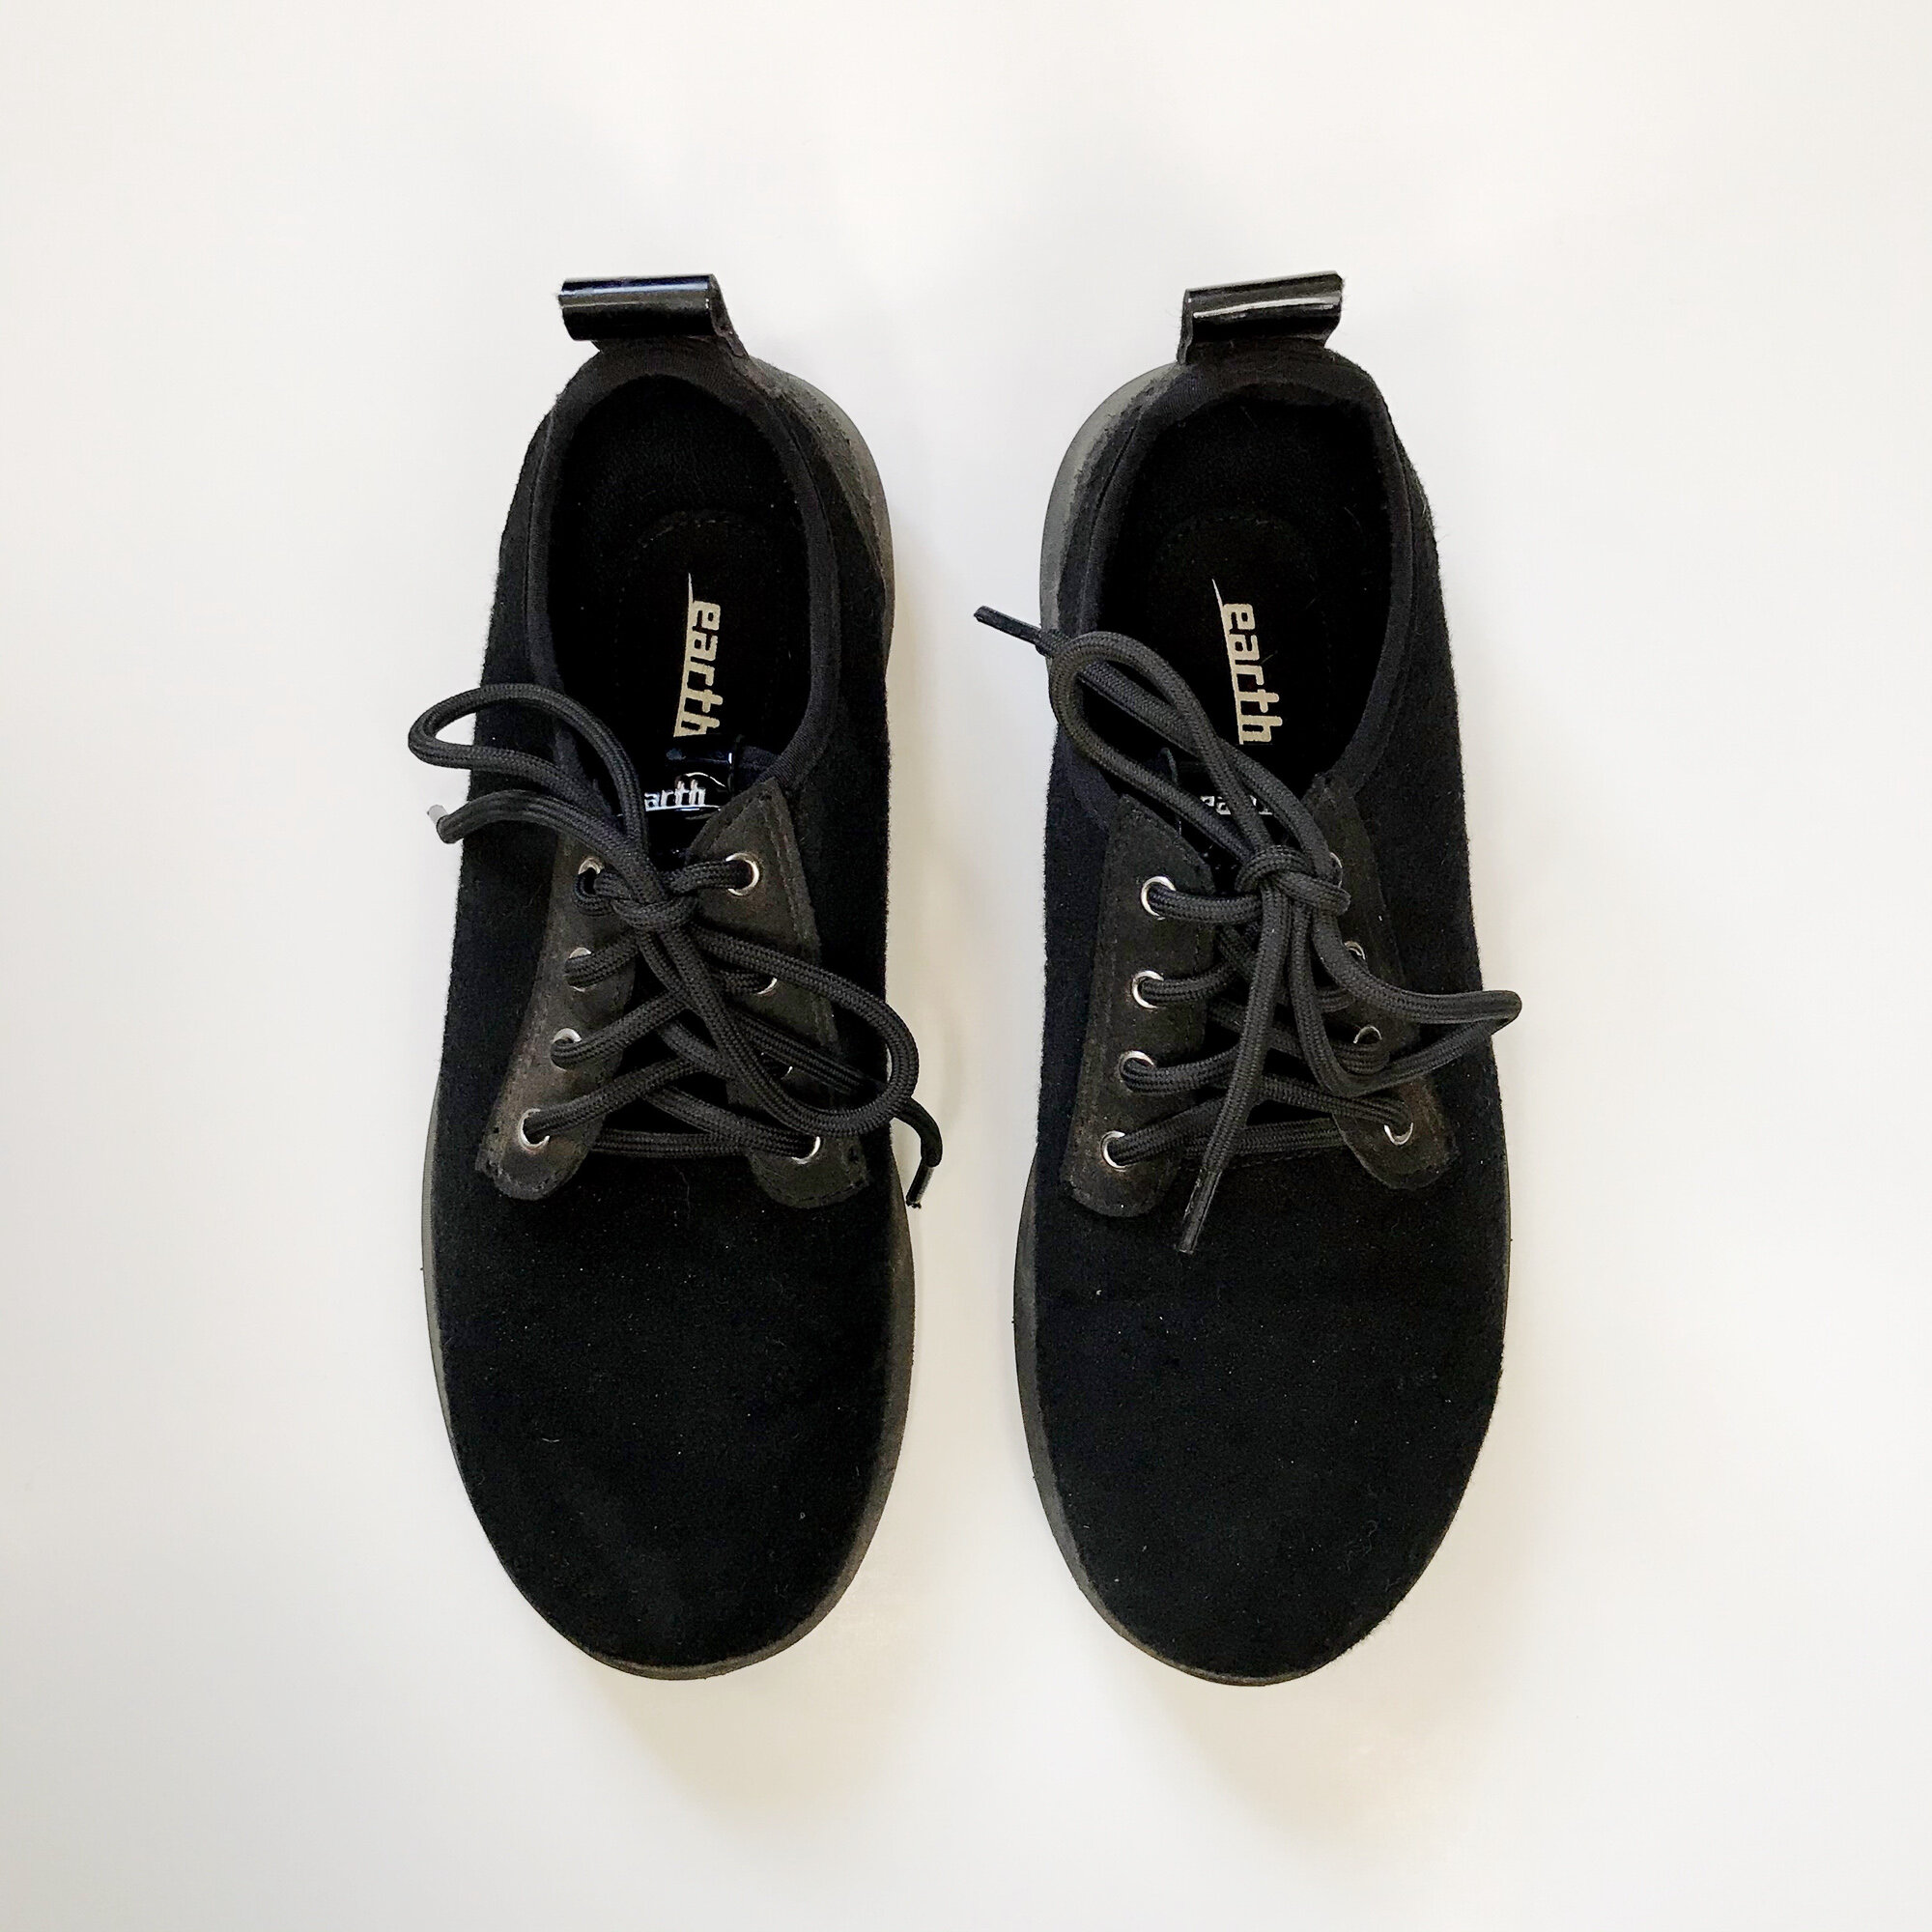 Earth Boomer wool sneaker review and outfit ideas — Cotton Cashmere Cat Hair